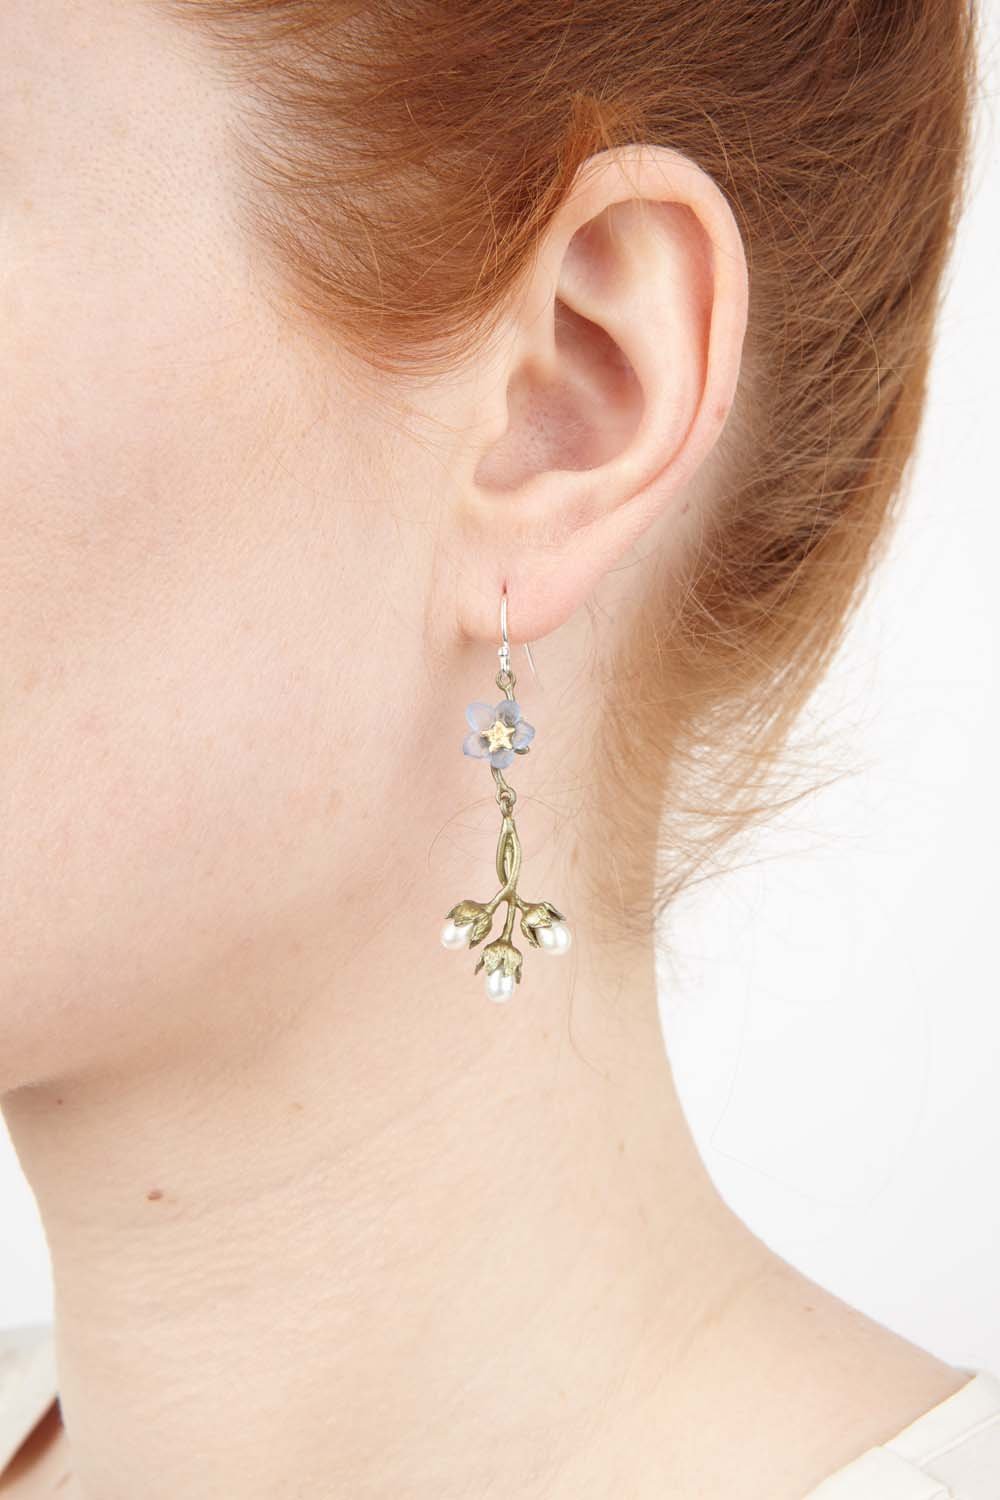 Forget Me Not Earrings - Wire